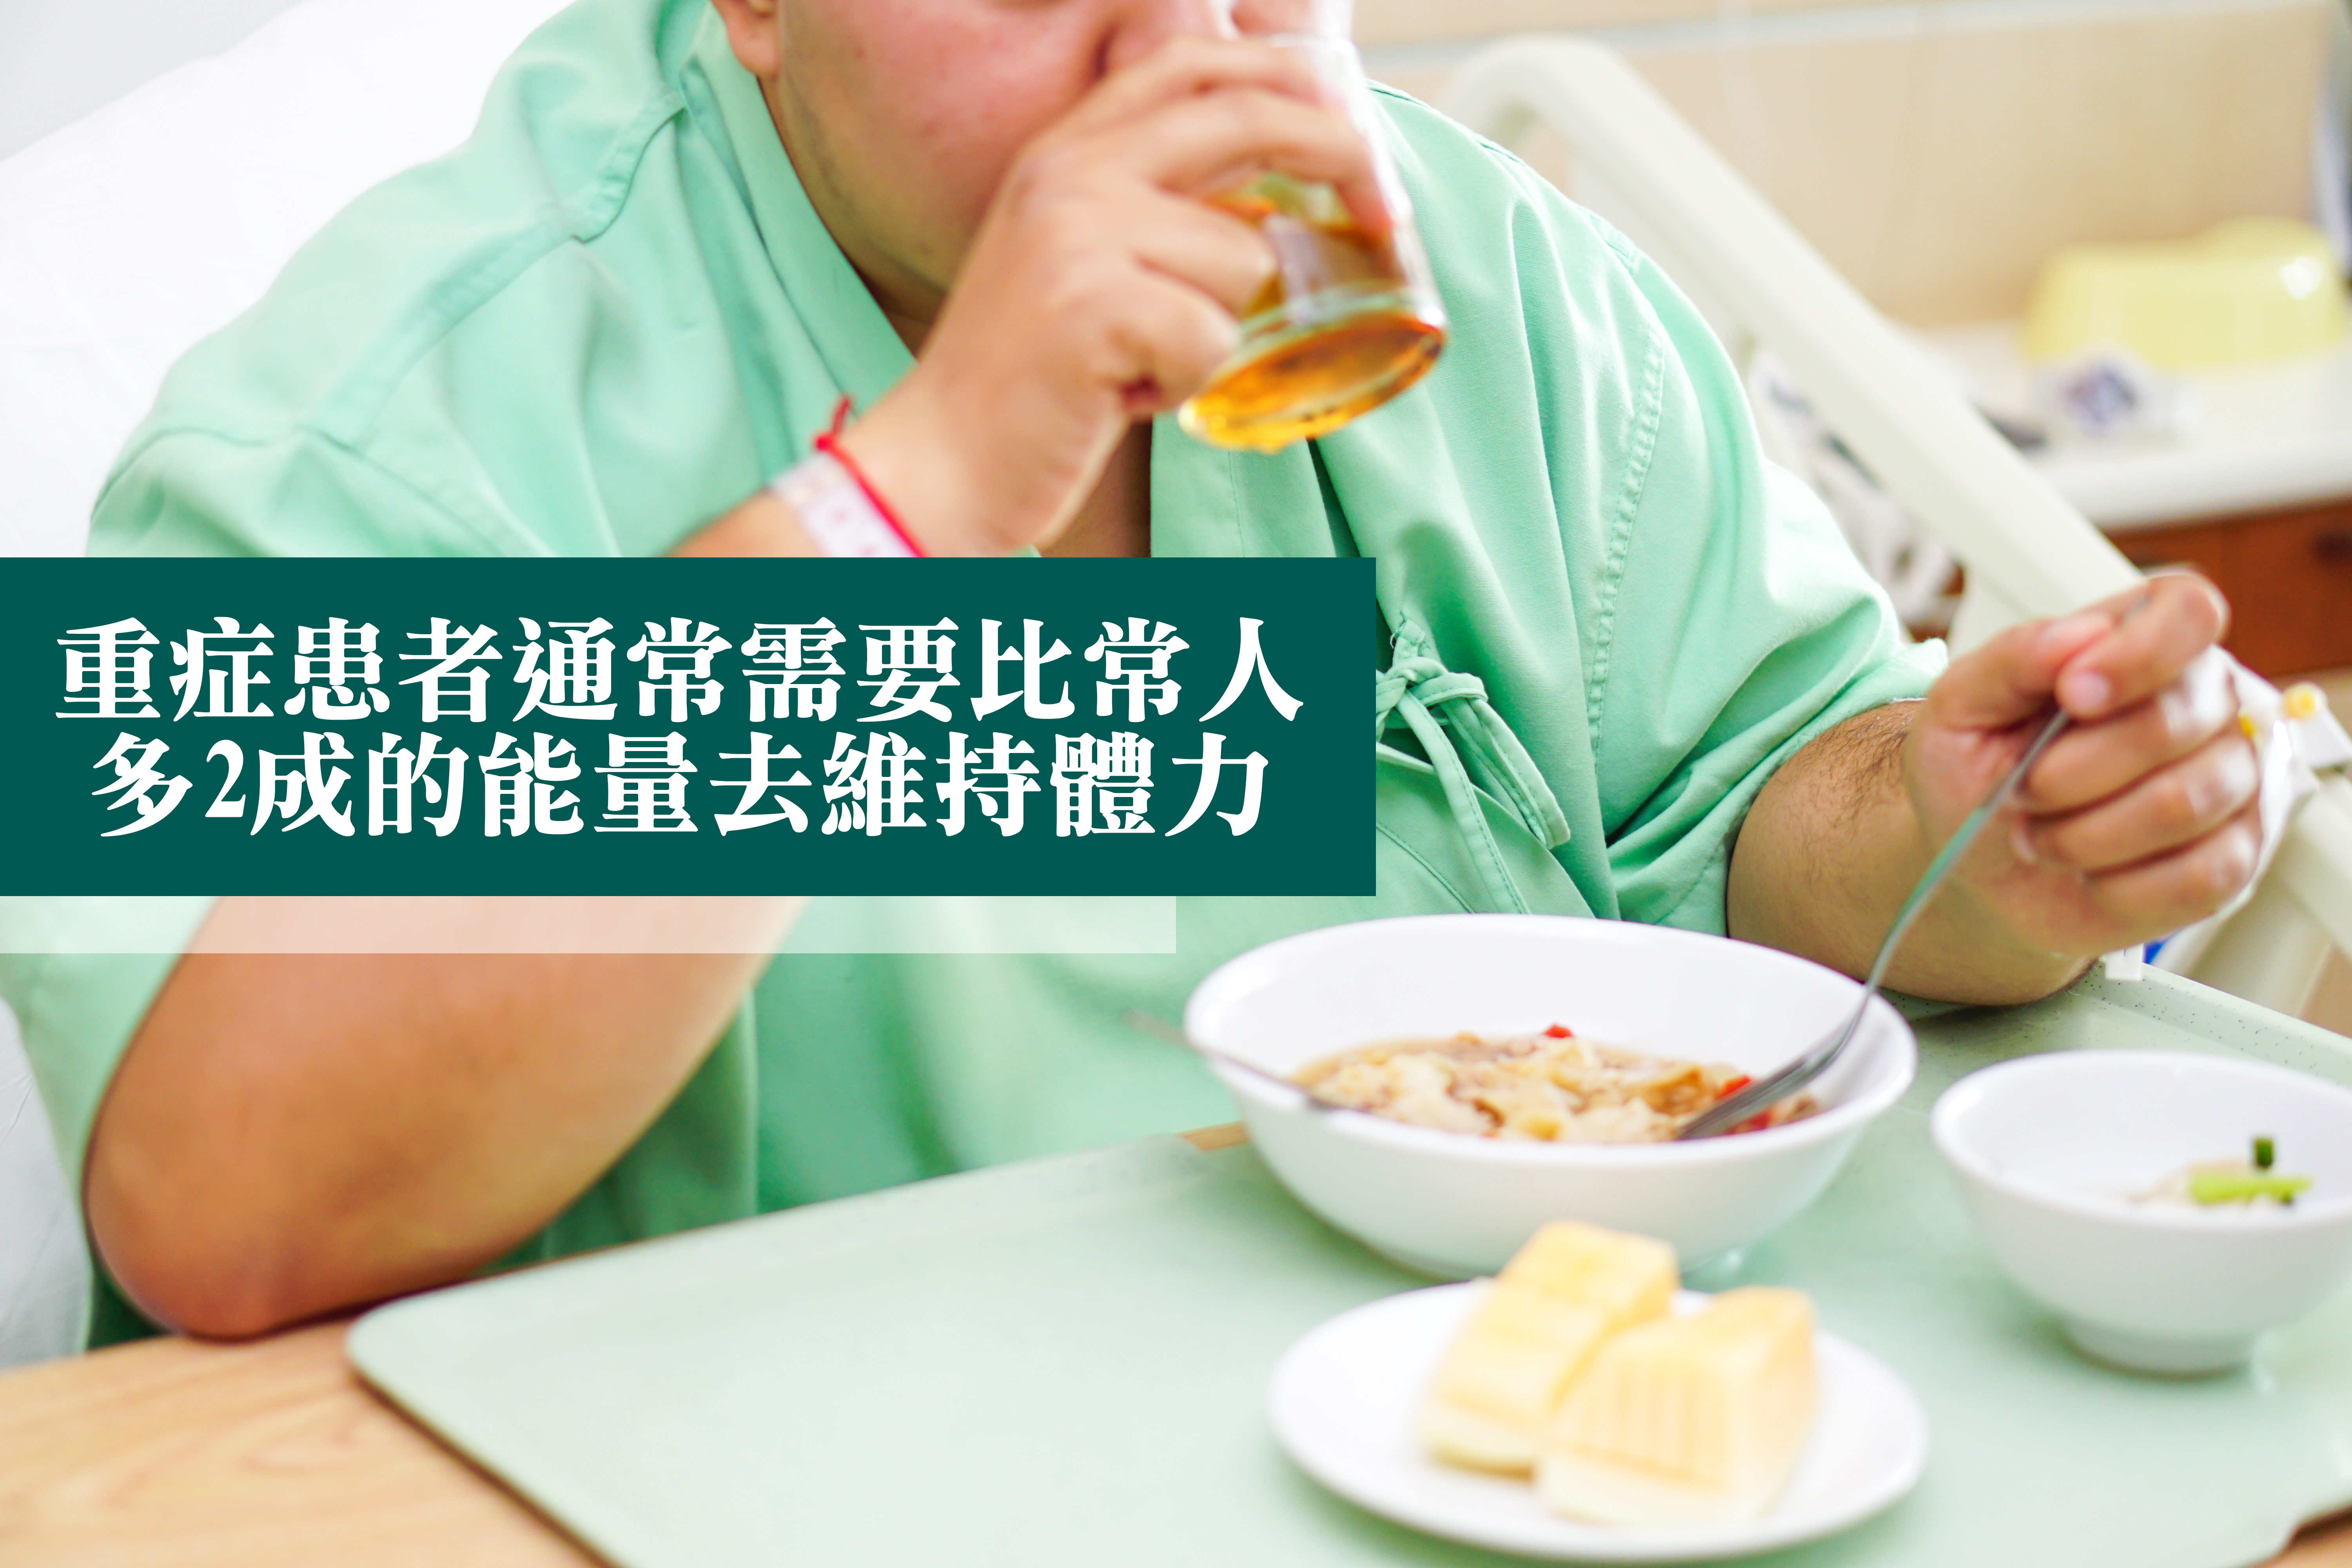 Nutrition and Patient-01.jpg